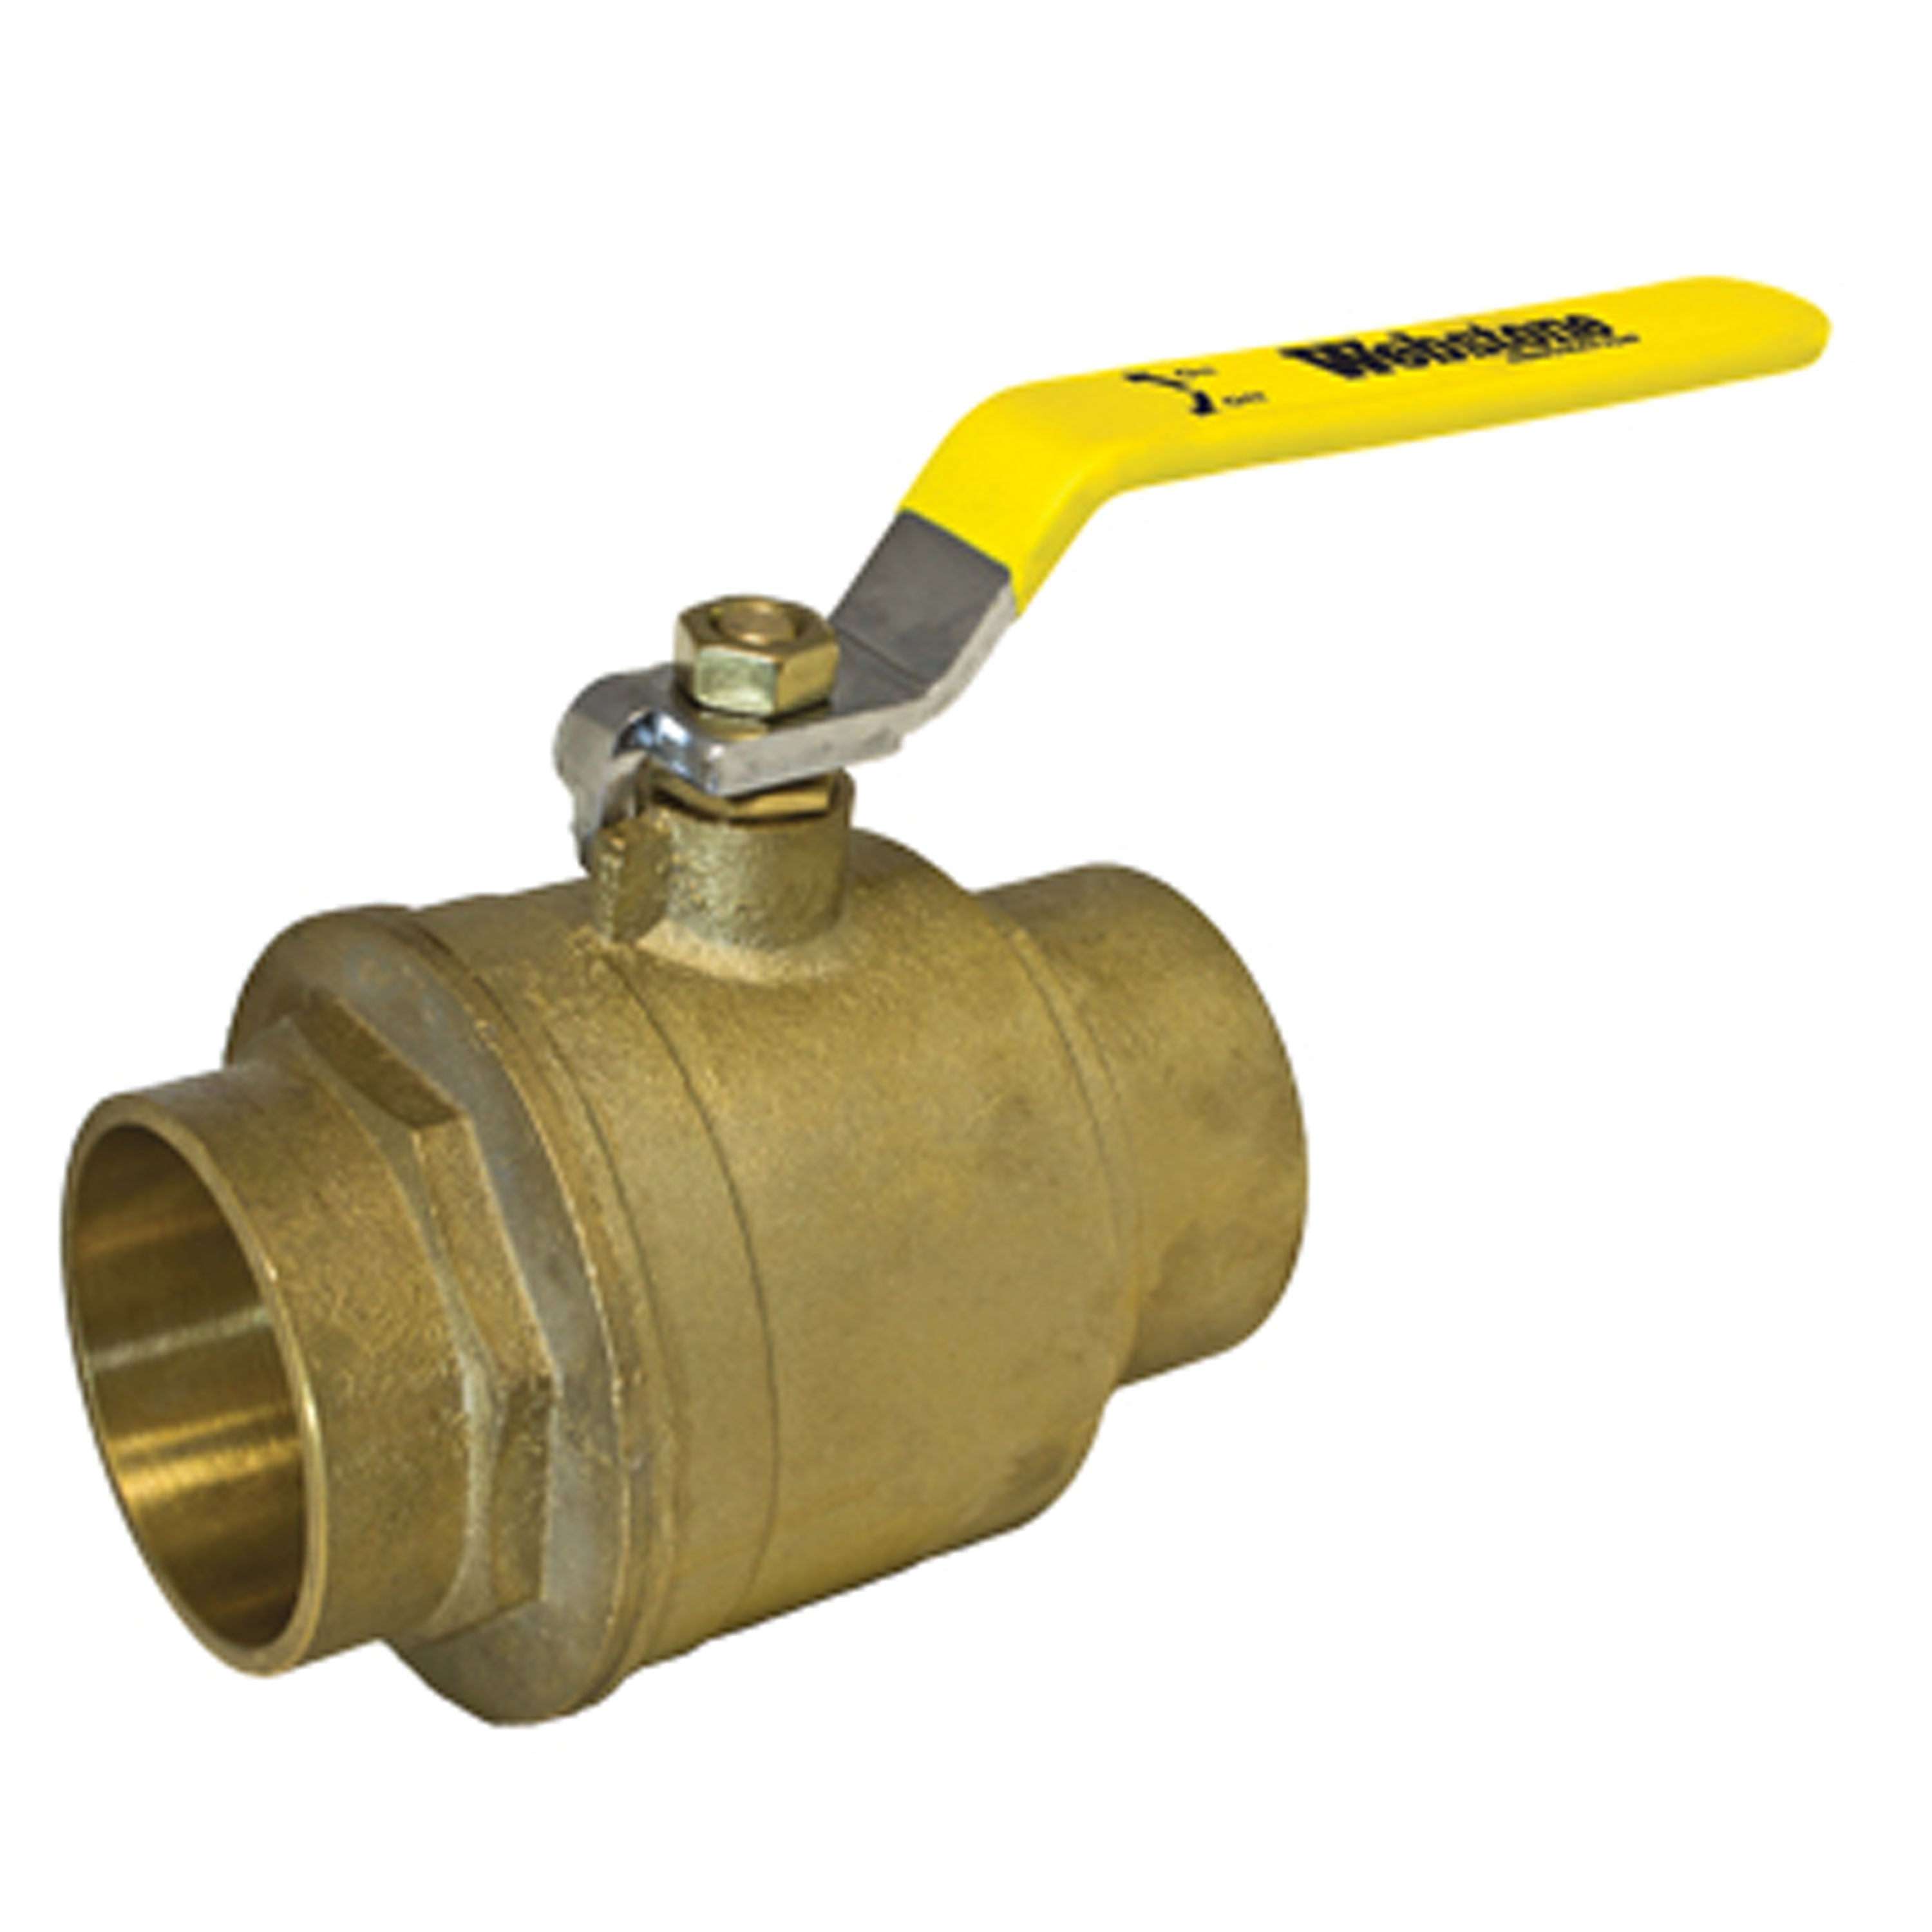 Webstone 51707 Standard Full Port Forged Brass Ball Valve with Chrome Plated Lever Handle - 2" Sweat H-51707